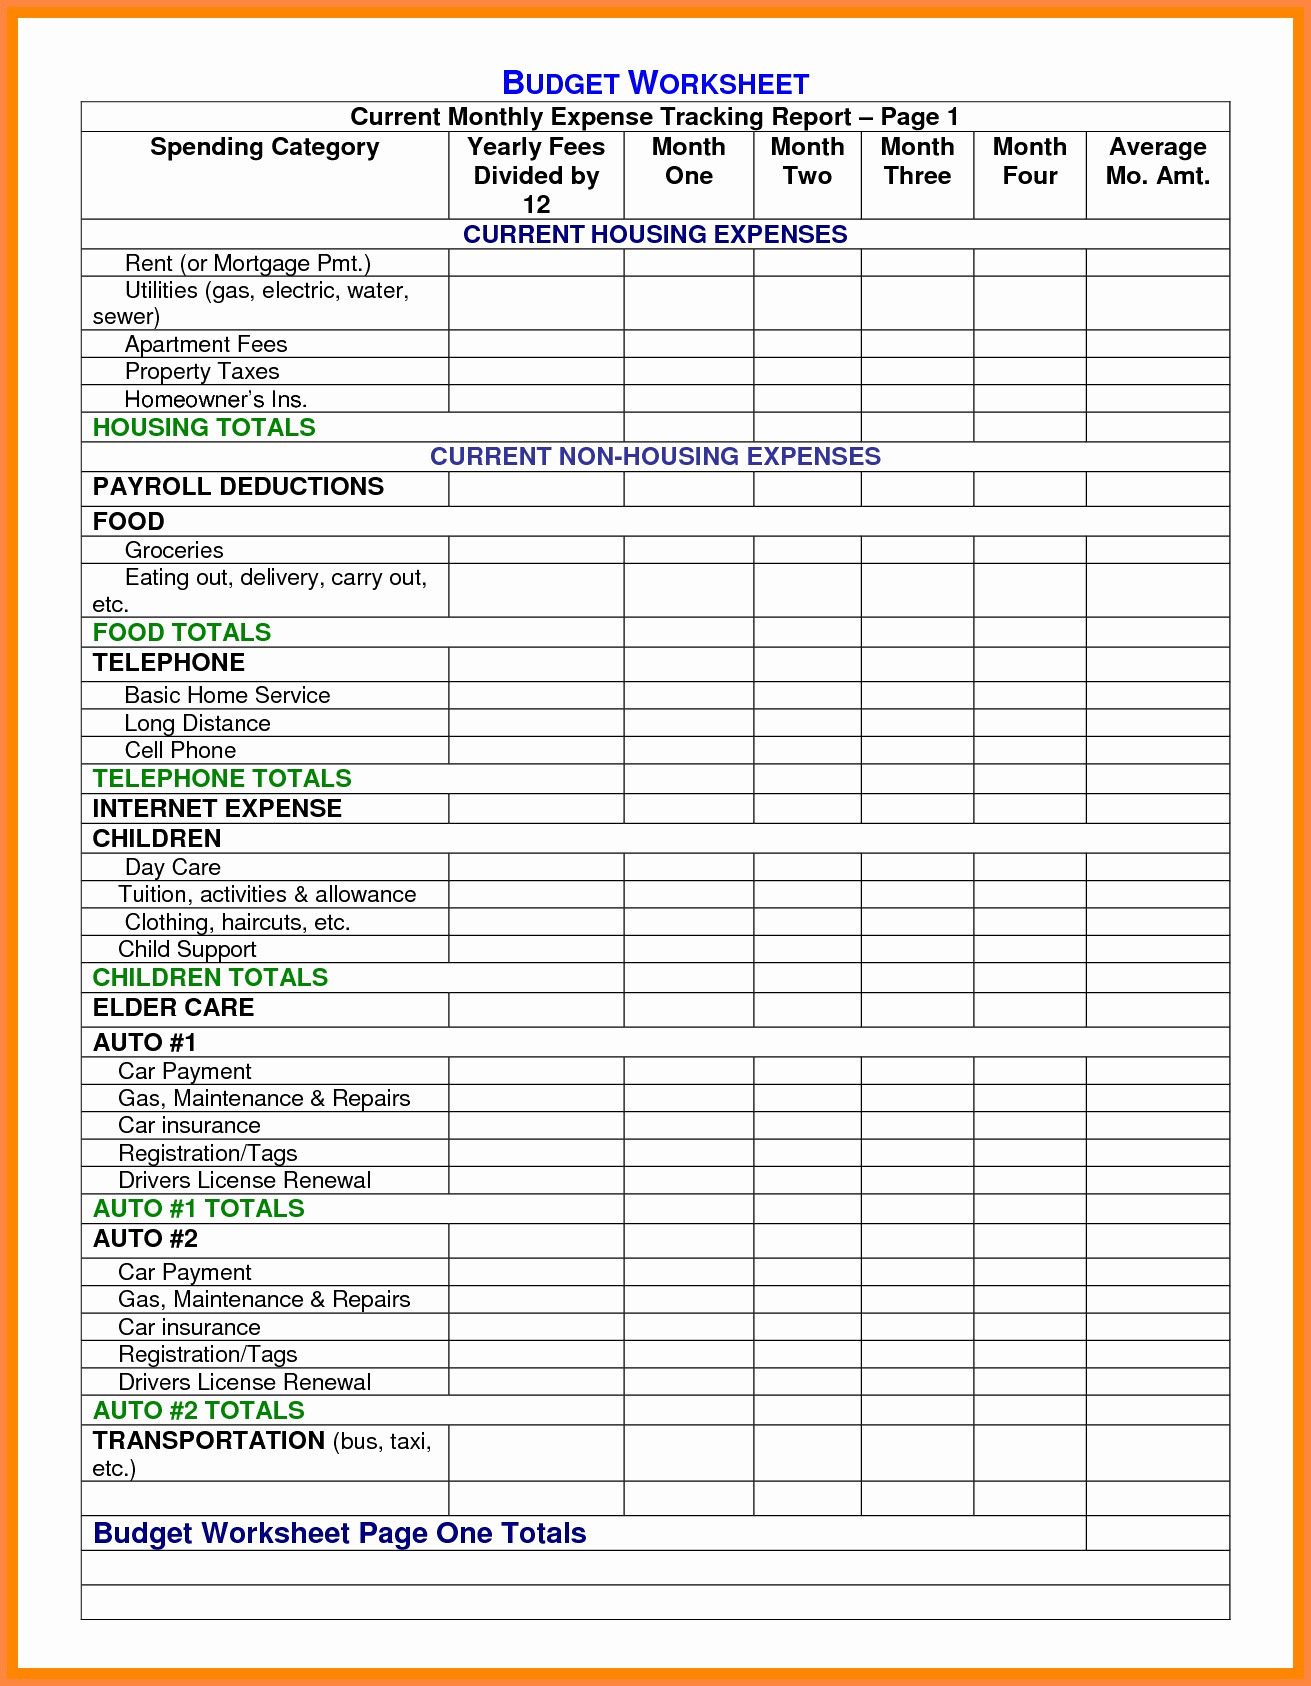 material-list-for-building-a-house-spreadsheet-db-excel